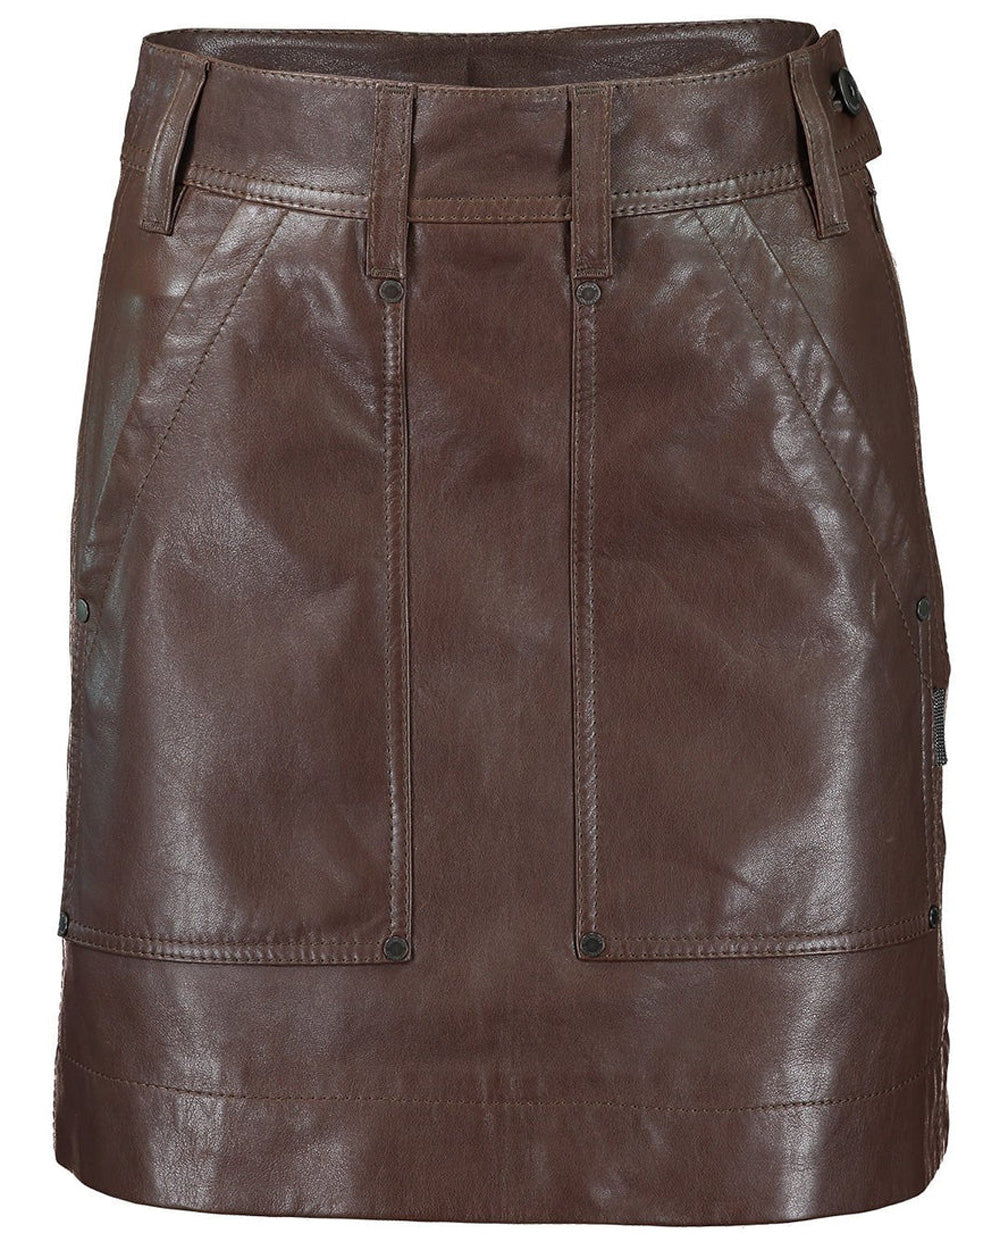 Brown Leather Patch Pocket Mini Skirt